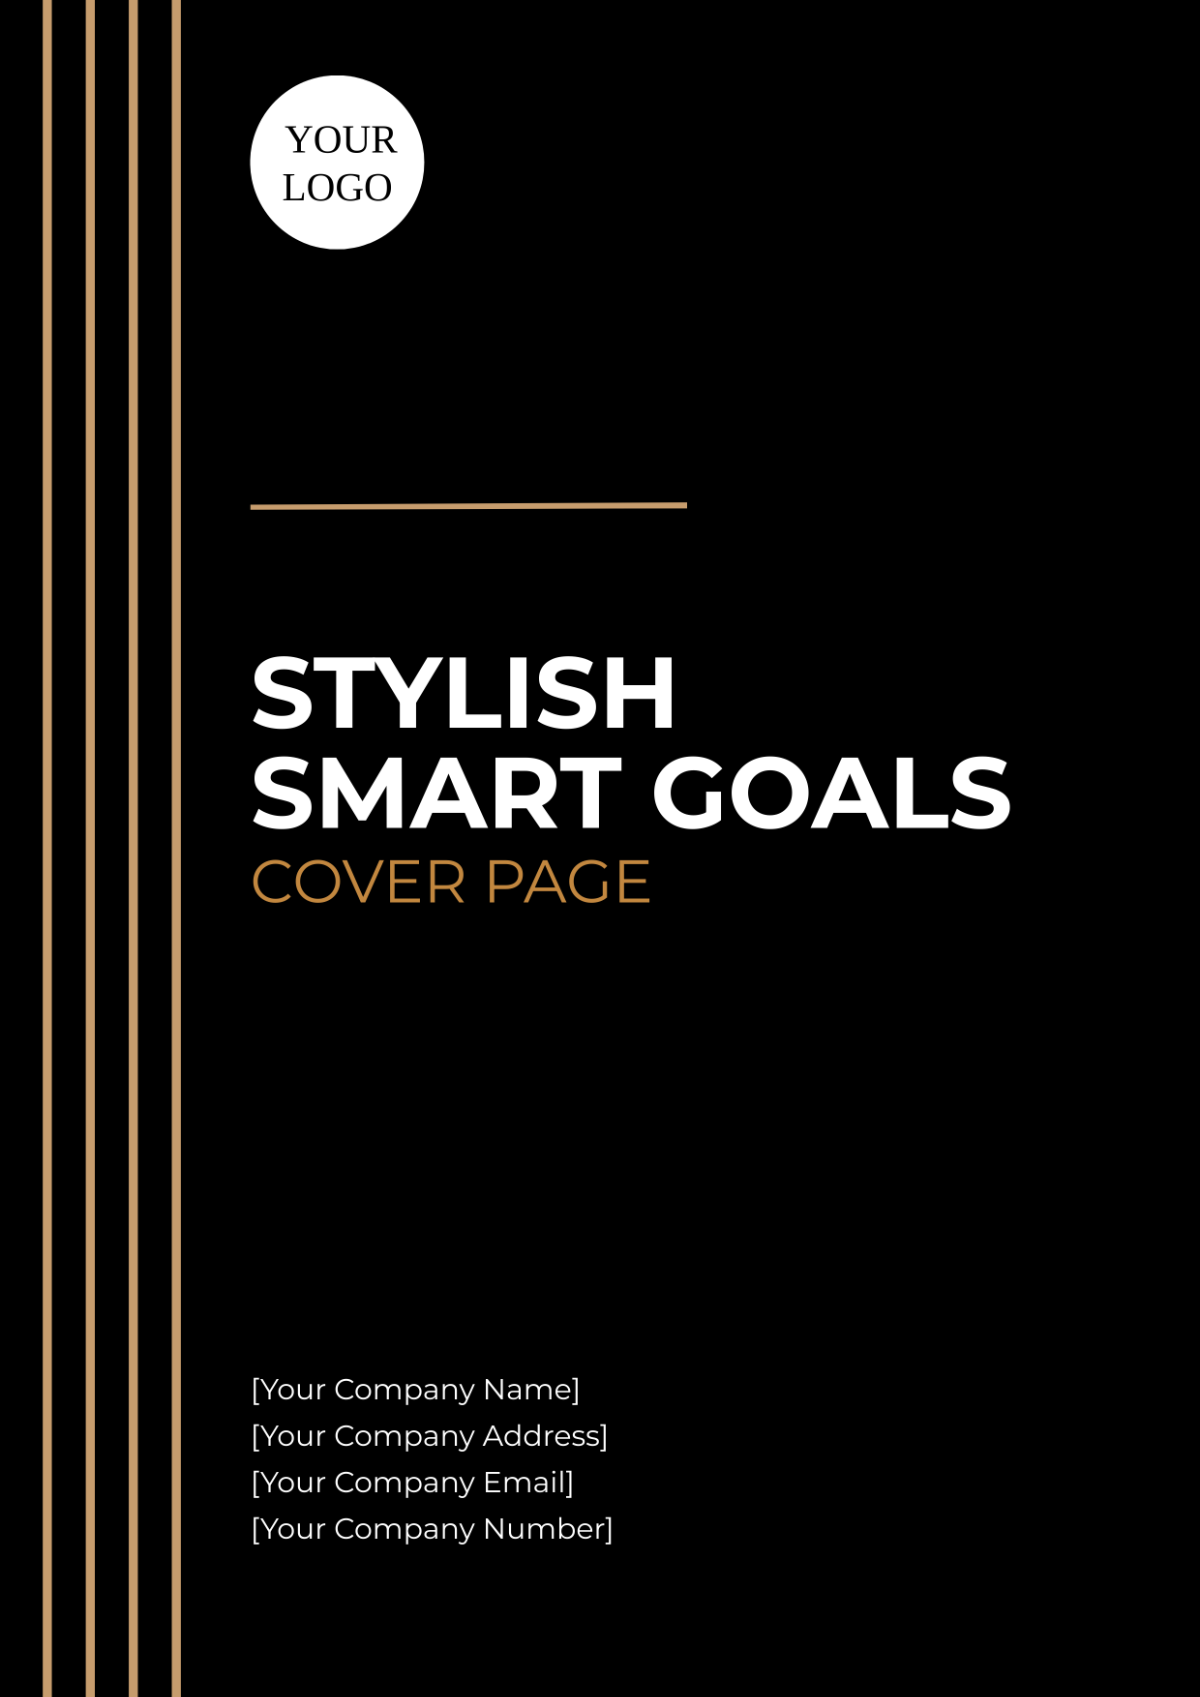 Stylish SMART Goals Cover Page